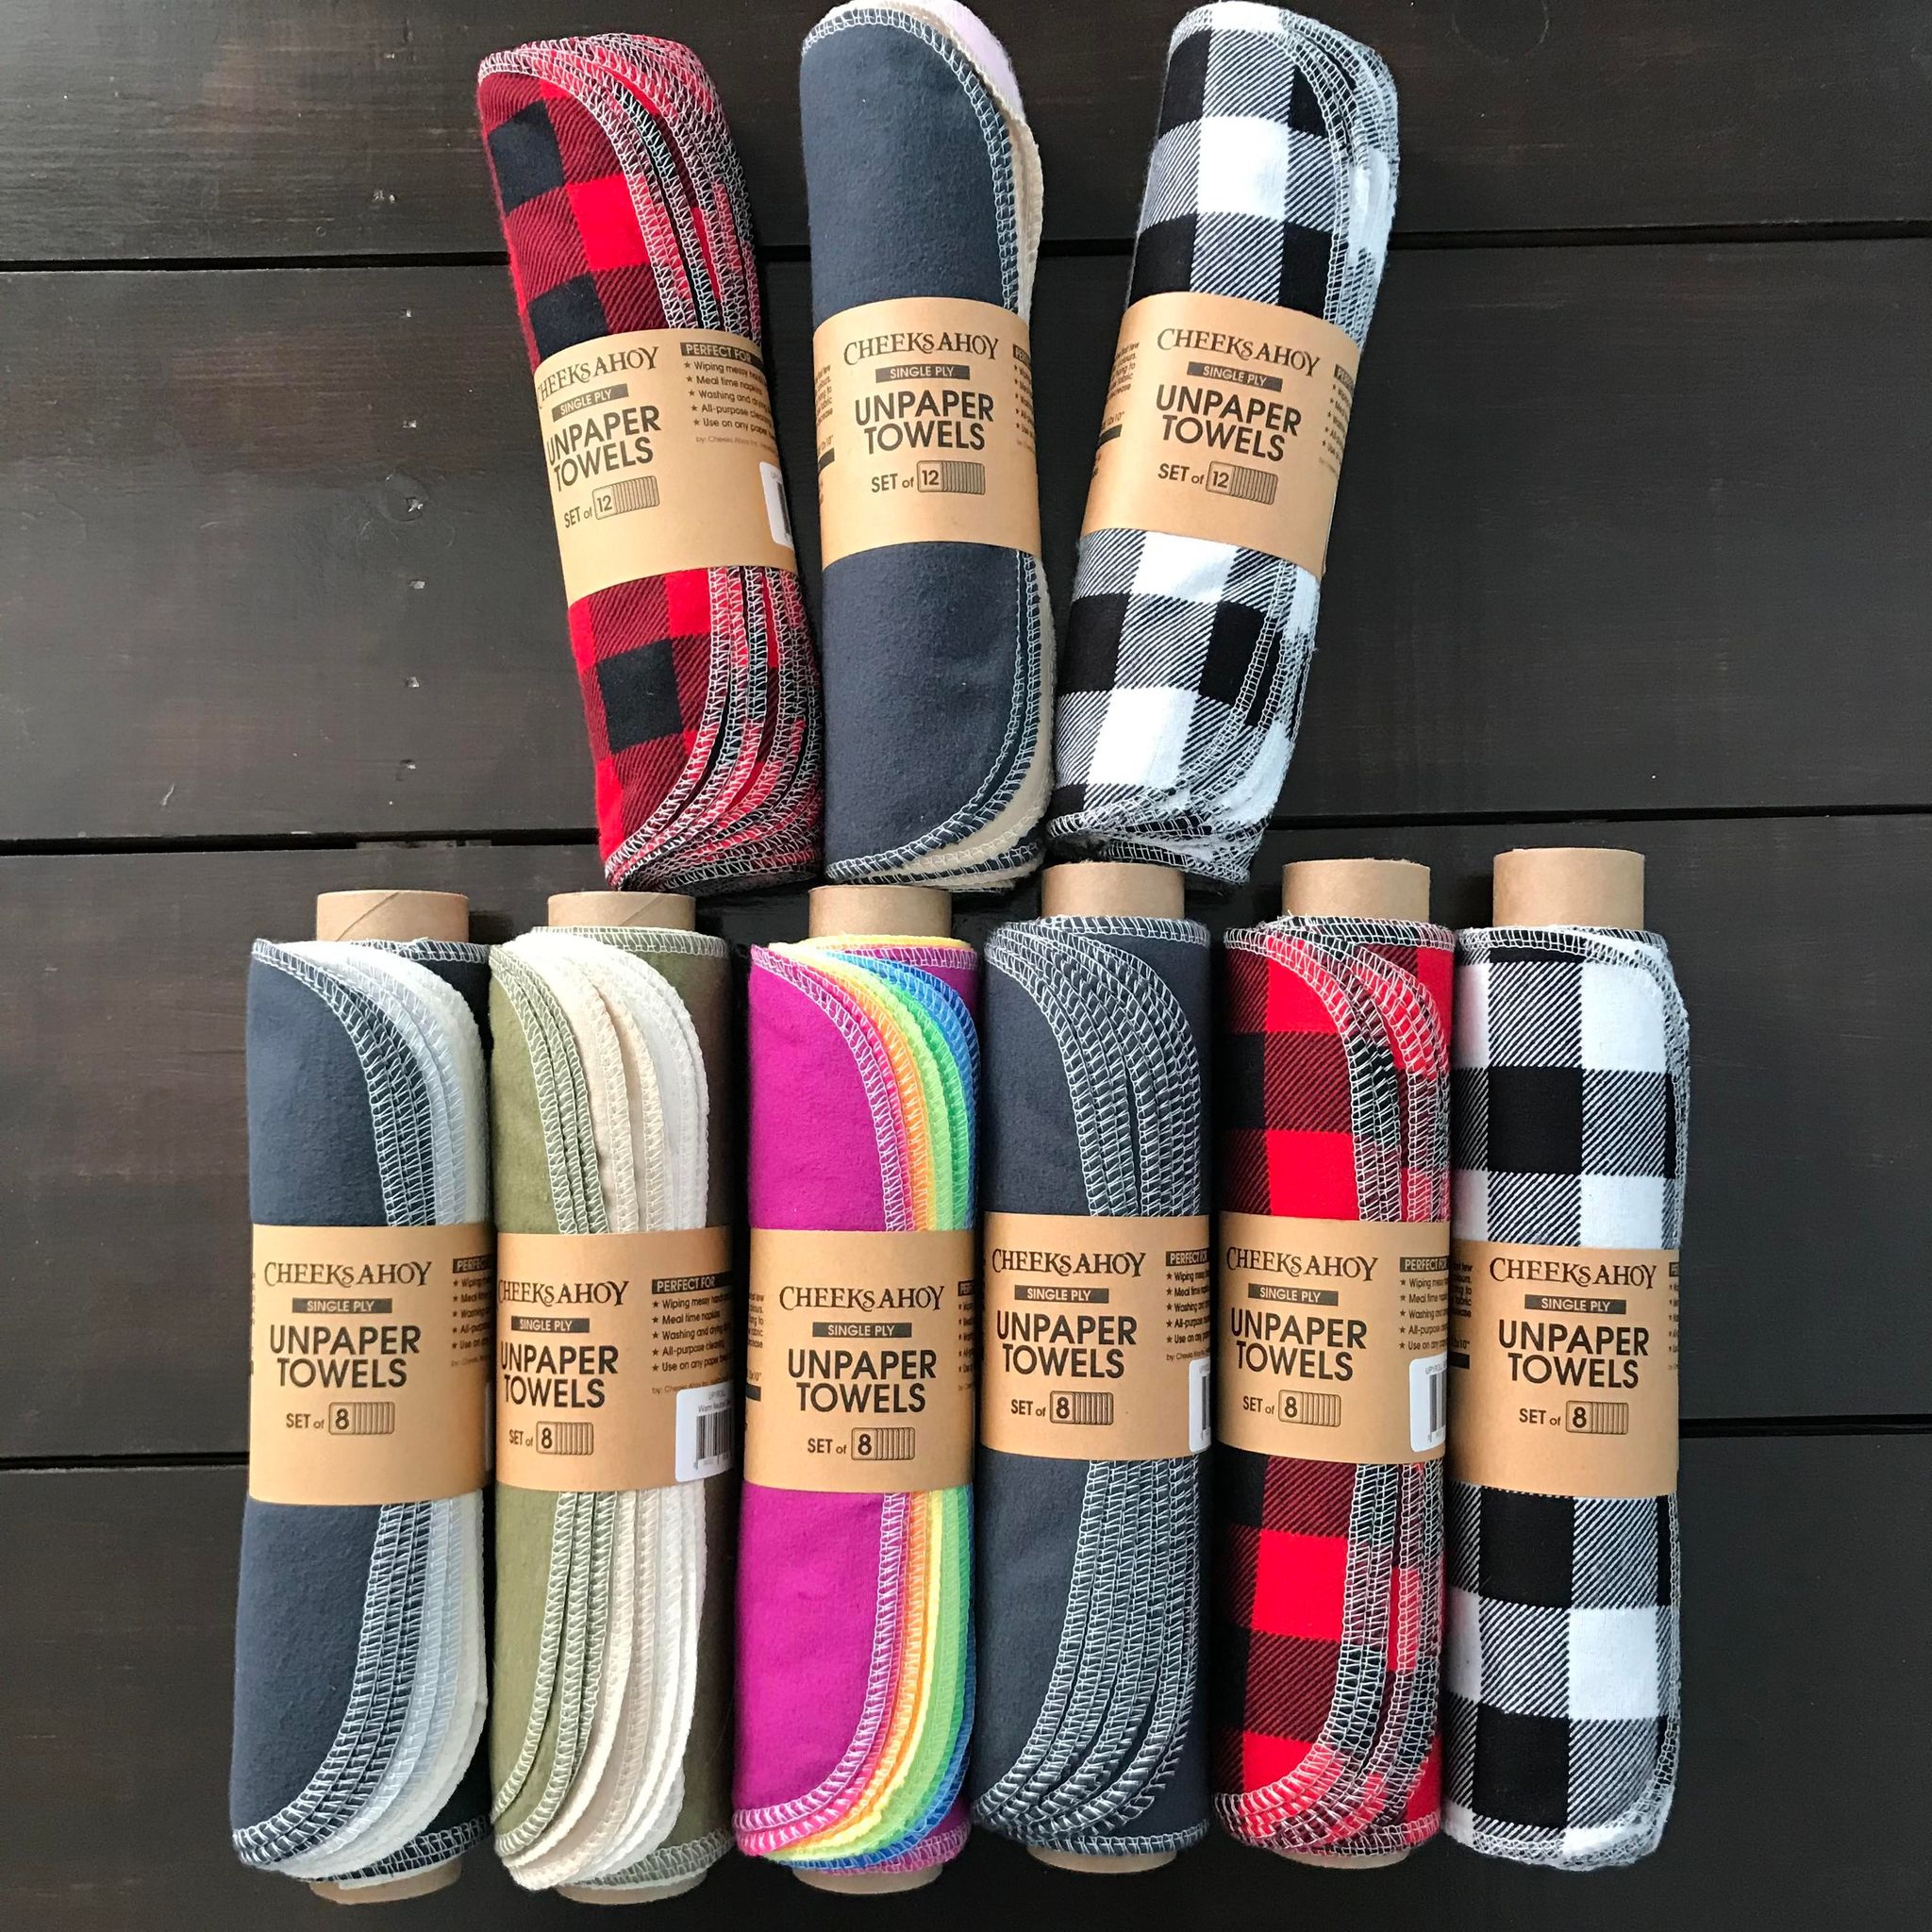 Nine varieties of single ply pre-rolled Unpaper Towels in warm neutral blush, warm neutral charcoal, warm neutral olive, rainbow, red and black plaid, white and black plaid, and charcoal handmade in Canada by Cheeks Ahoy